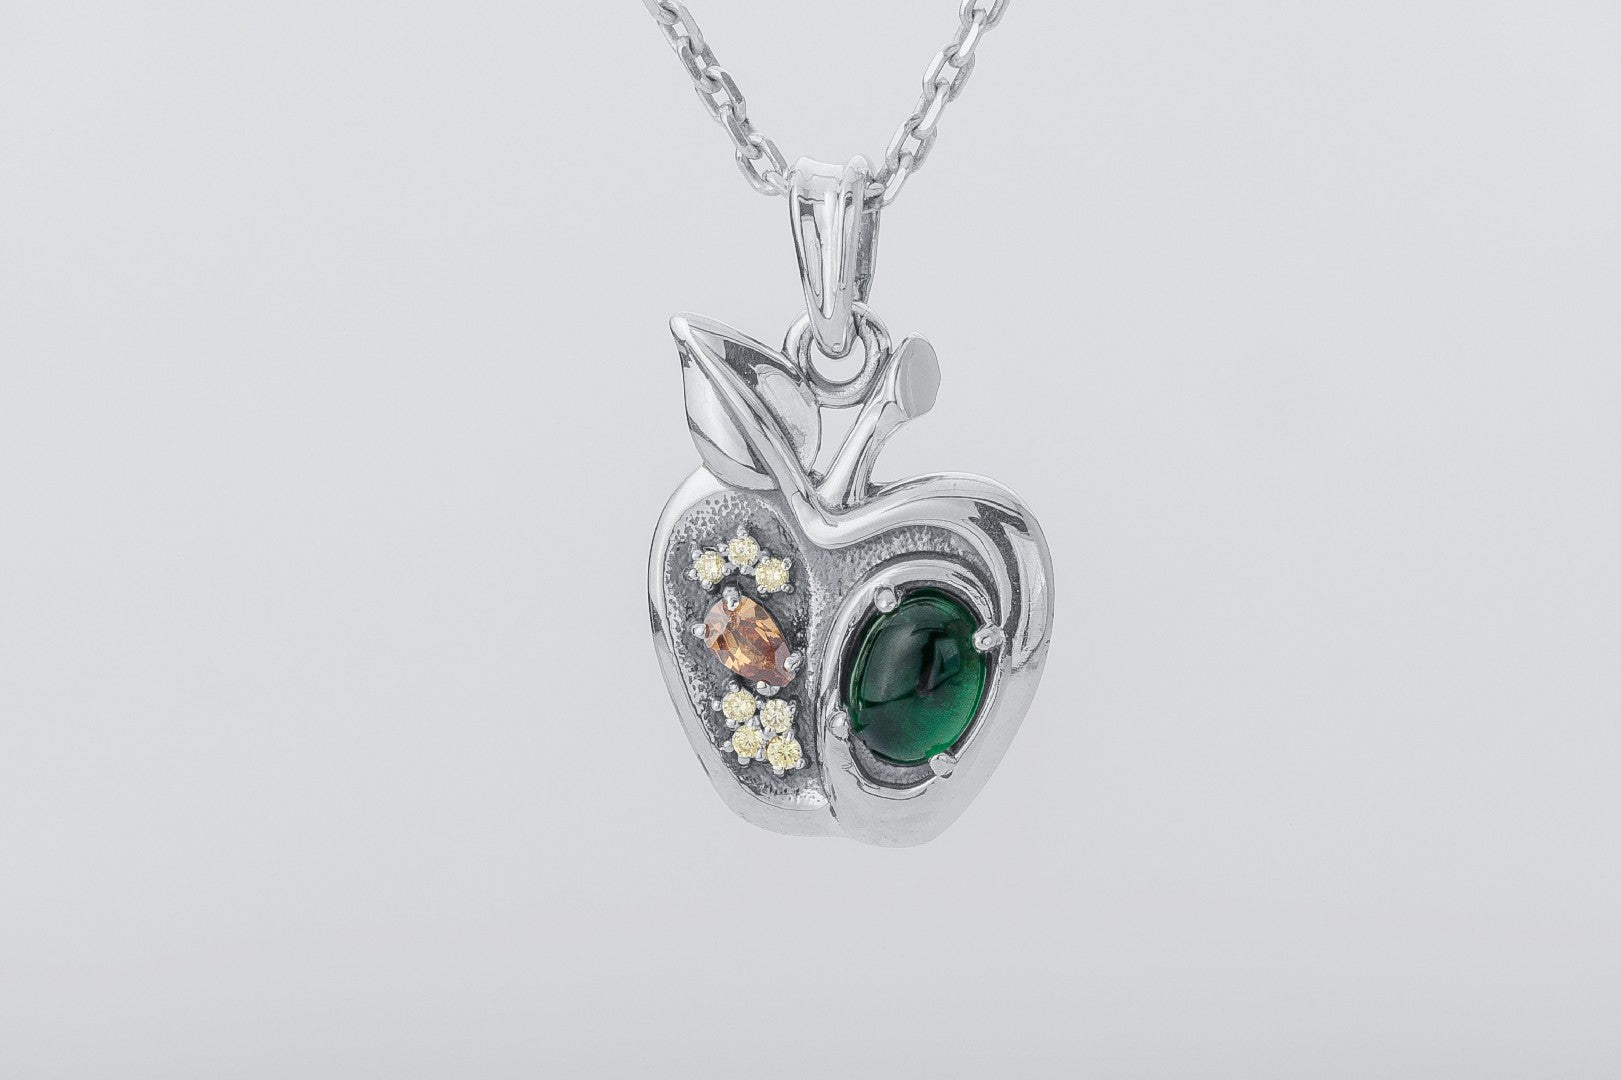 Apple Pendant with Gems, 925 Silver